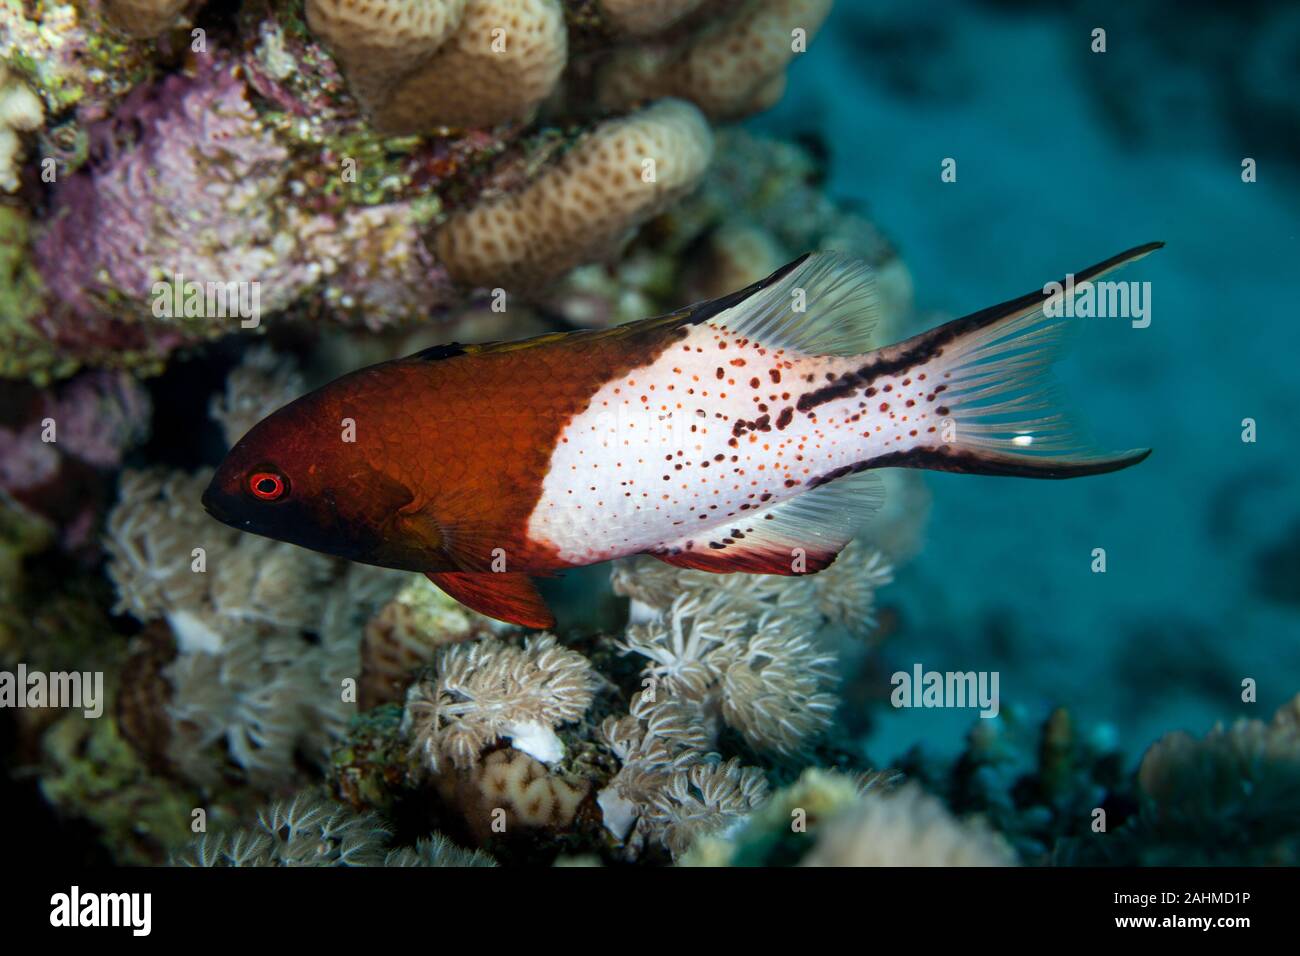 The lyretailed hogfish, or Bodianus anthiodes, is a species of wrasse from the genus Bodianus Stock Photo